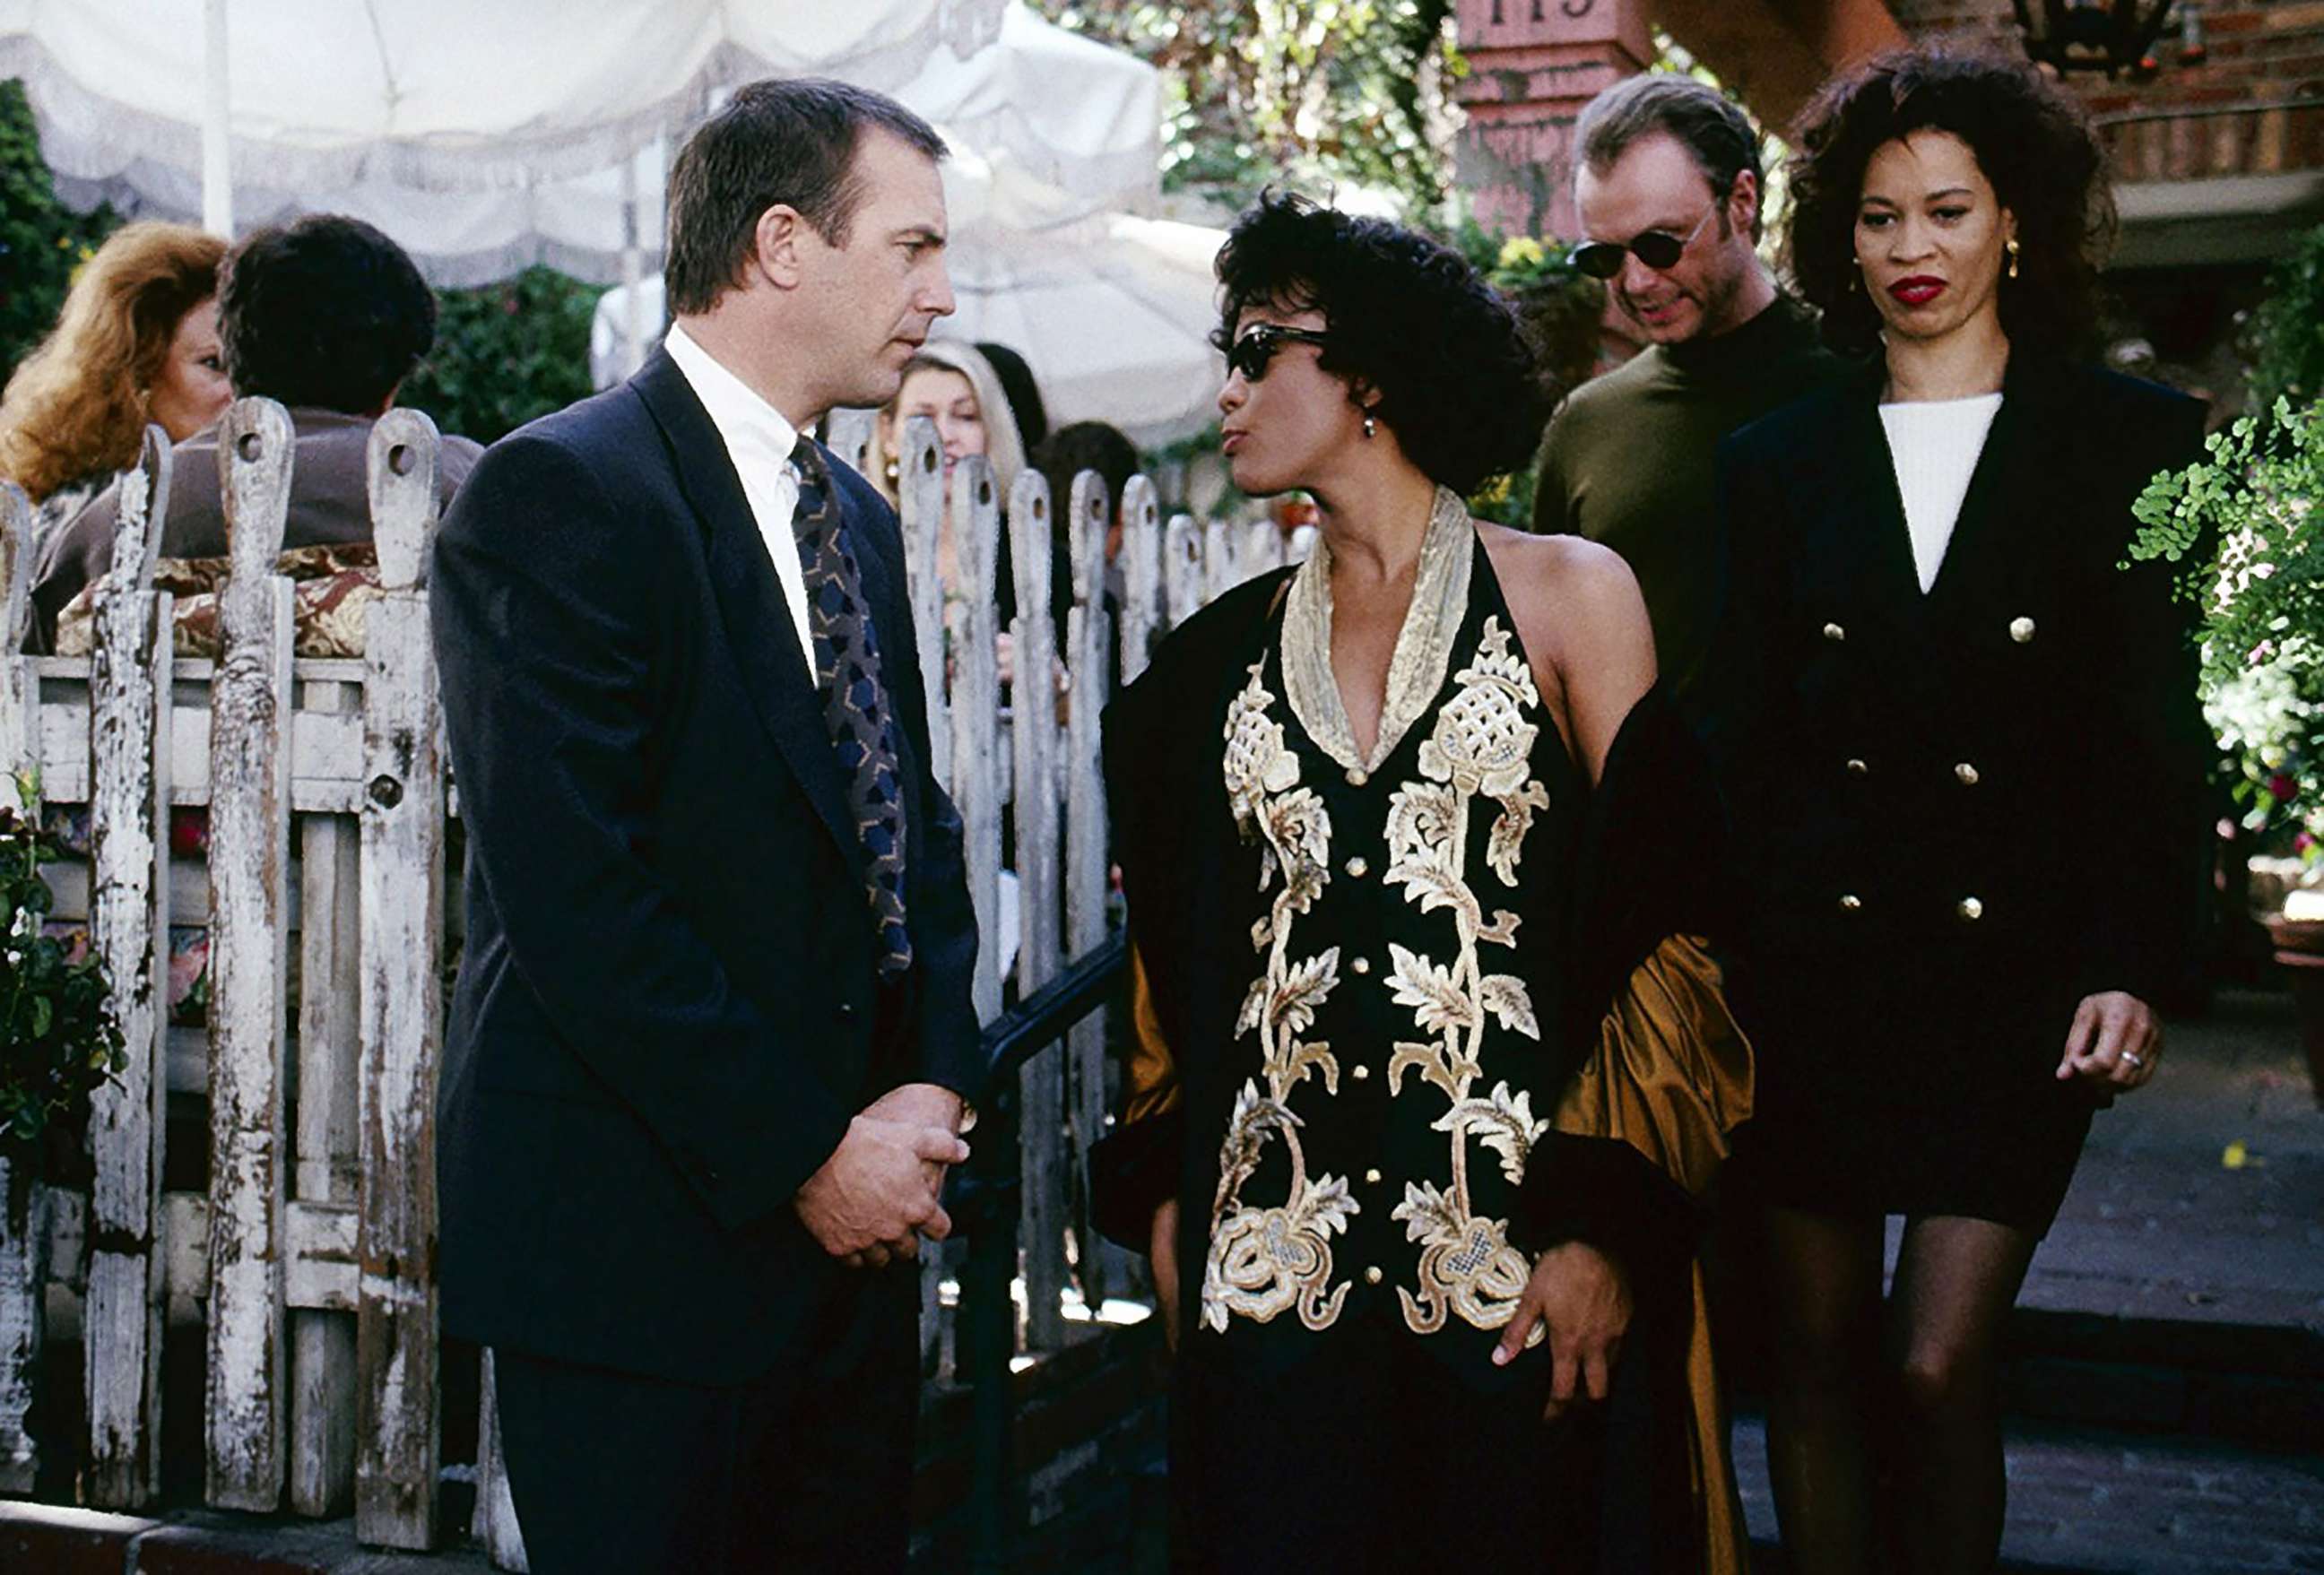 PHOTO: Kevin Costner and Whitney Houston appear in a scene from "The Bodyguard."